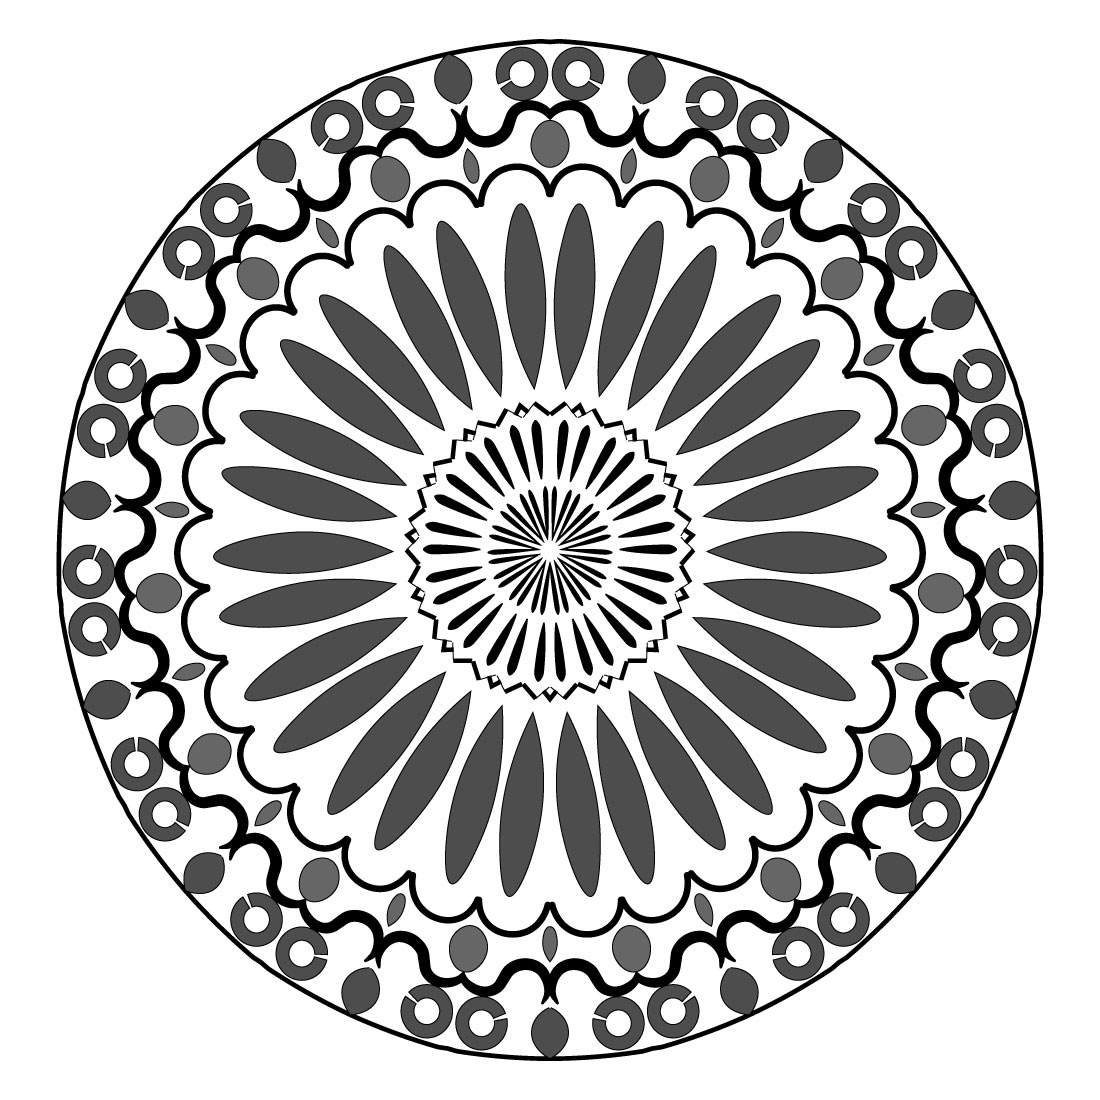 Mandala art with black and white rounded circles cover image.